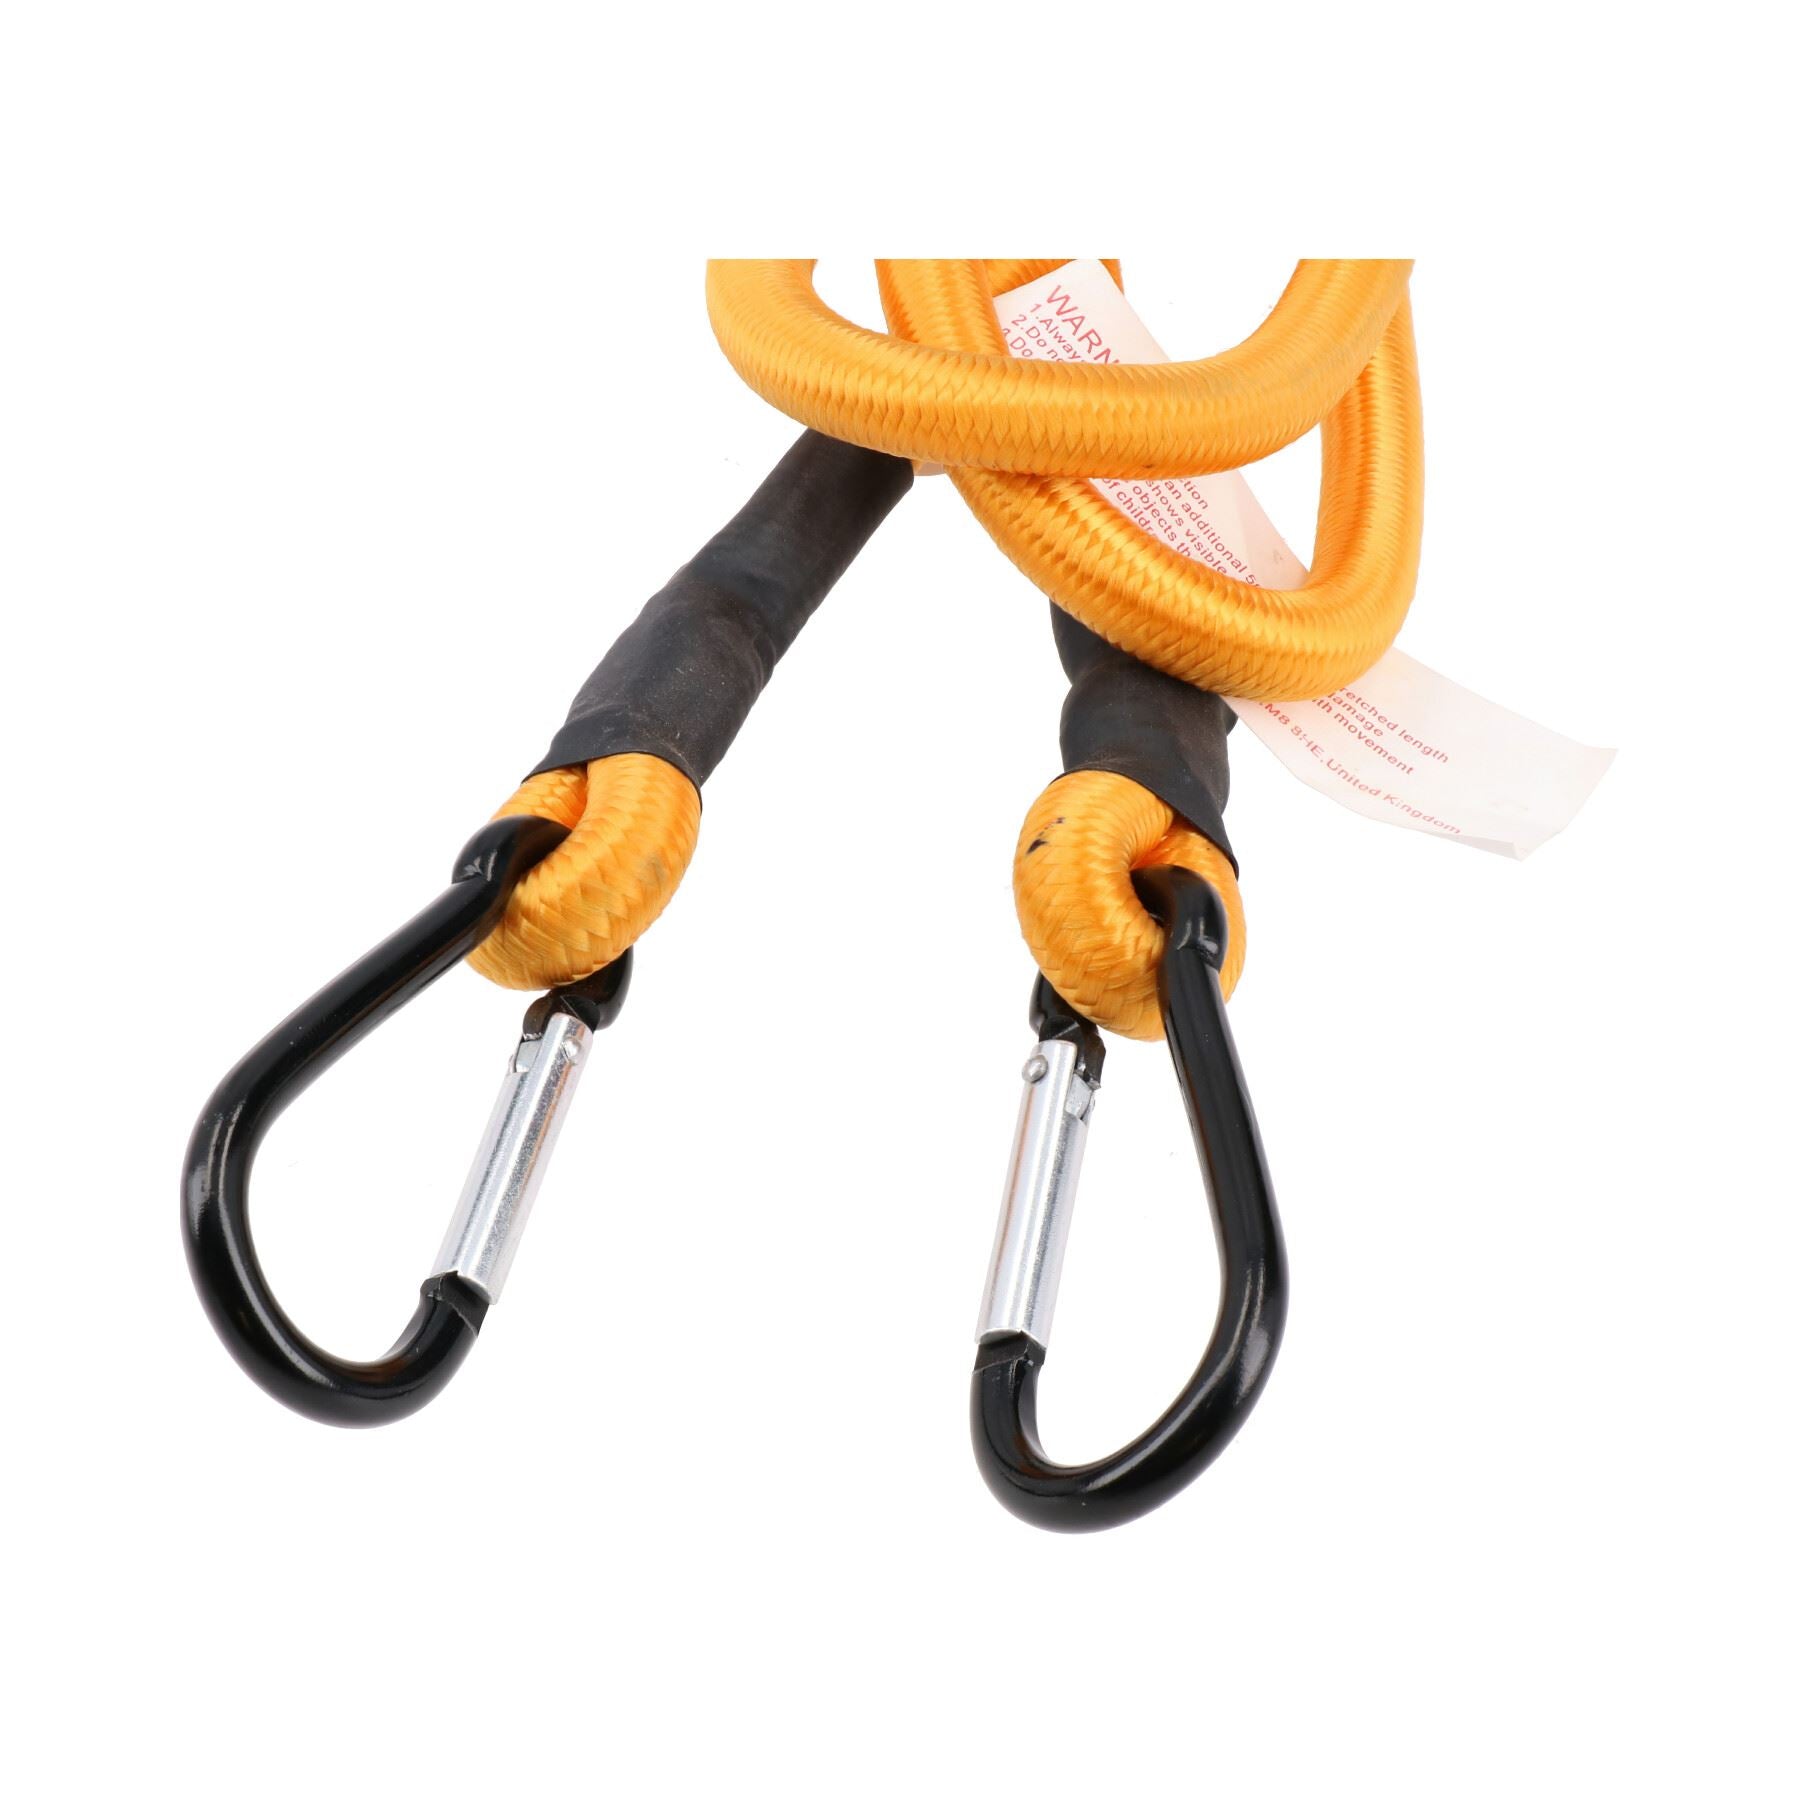 48” Bungee Rope with Carabiner Clips Cords Elastic Tie Down Fasteners